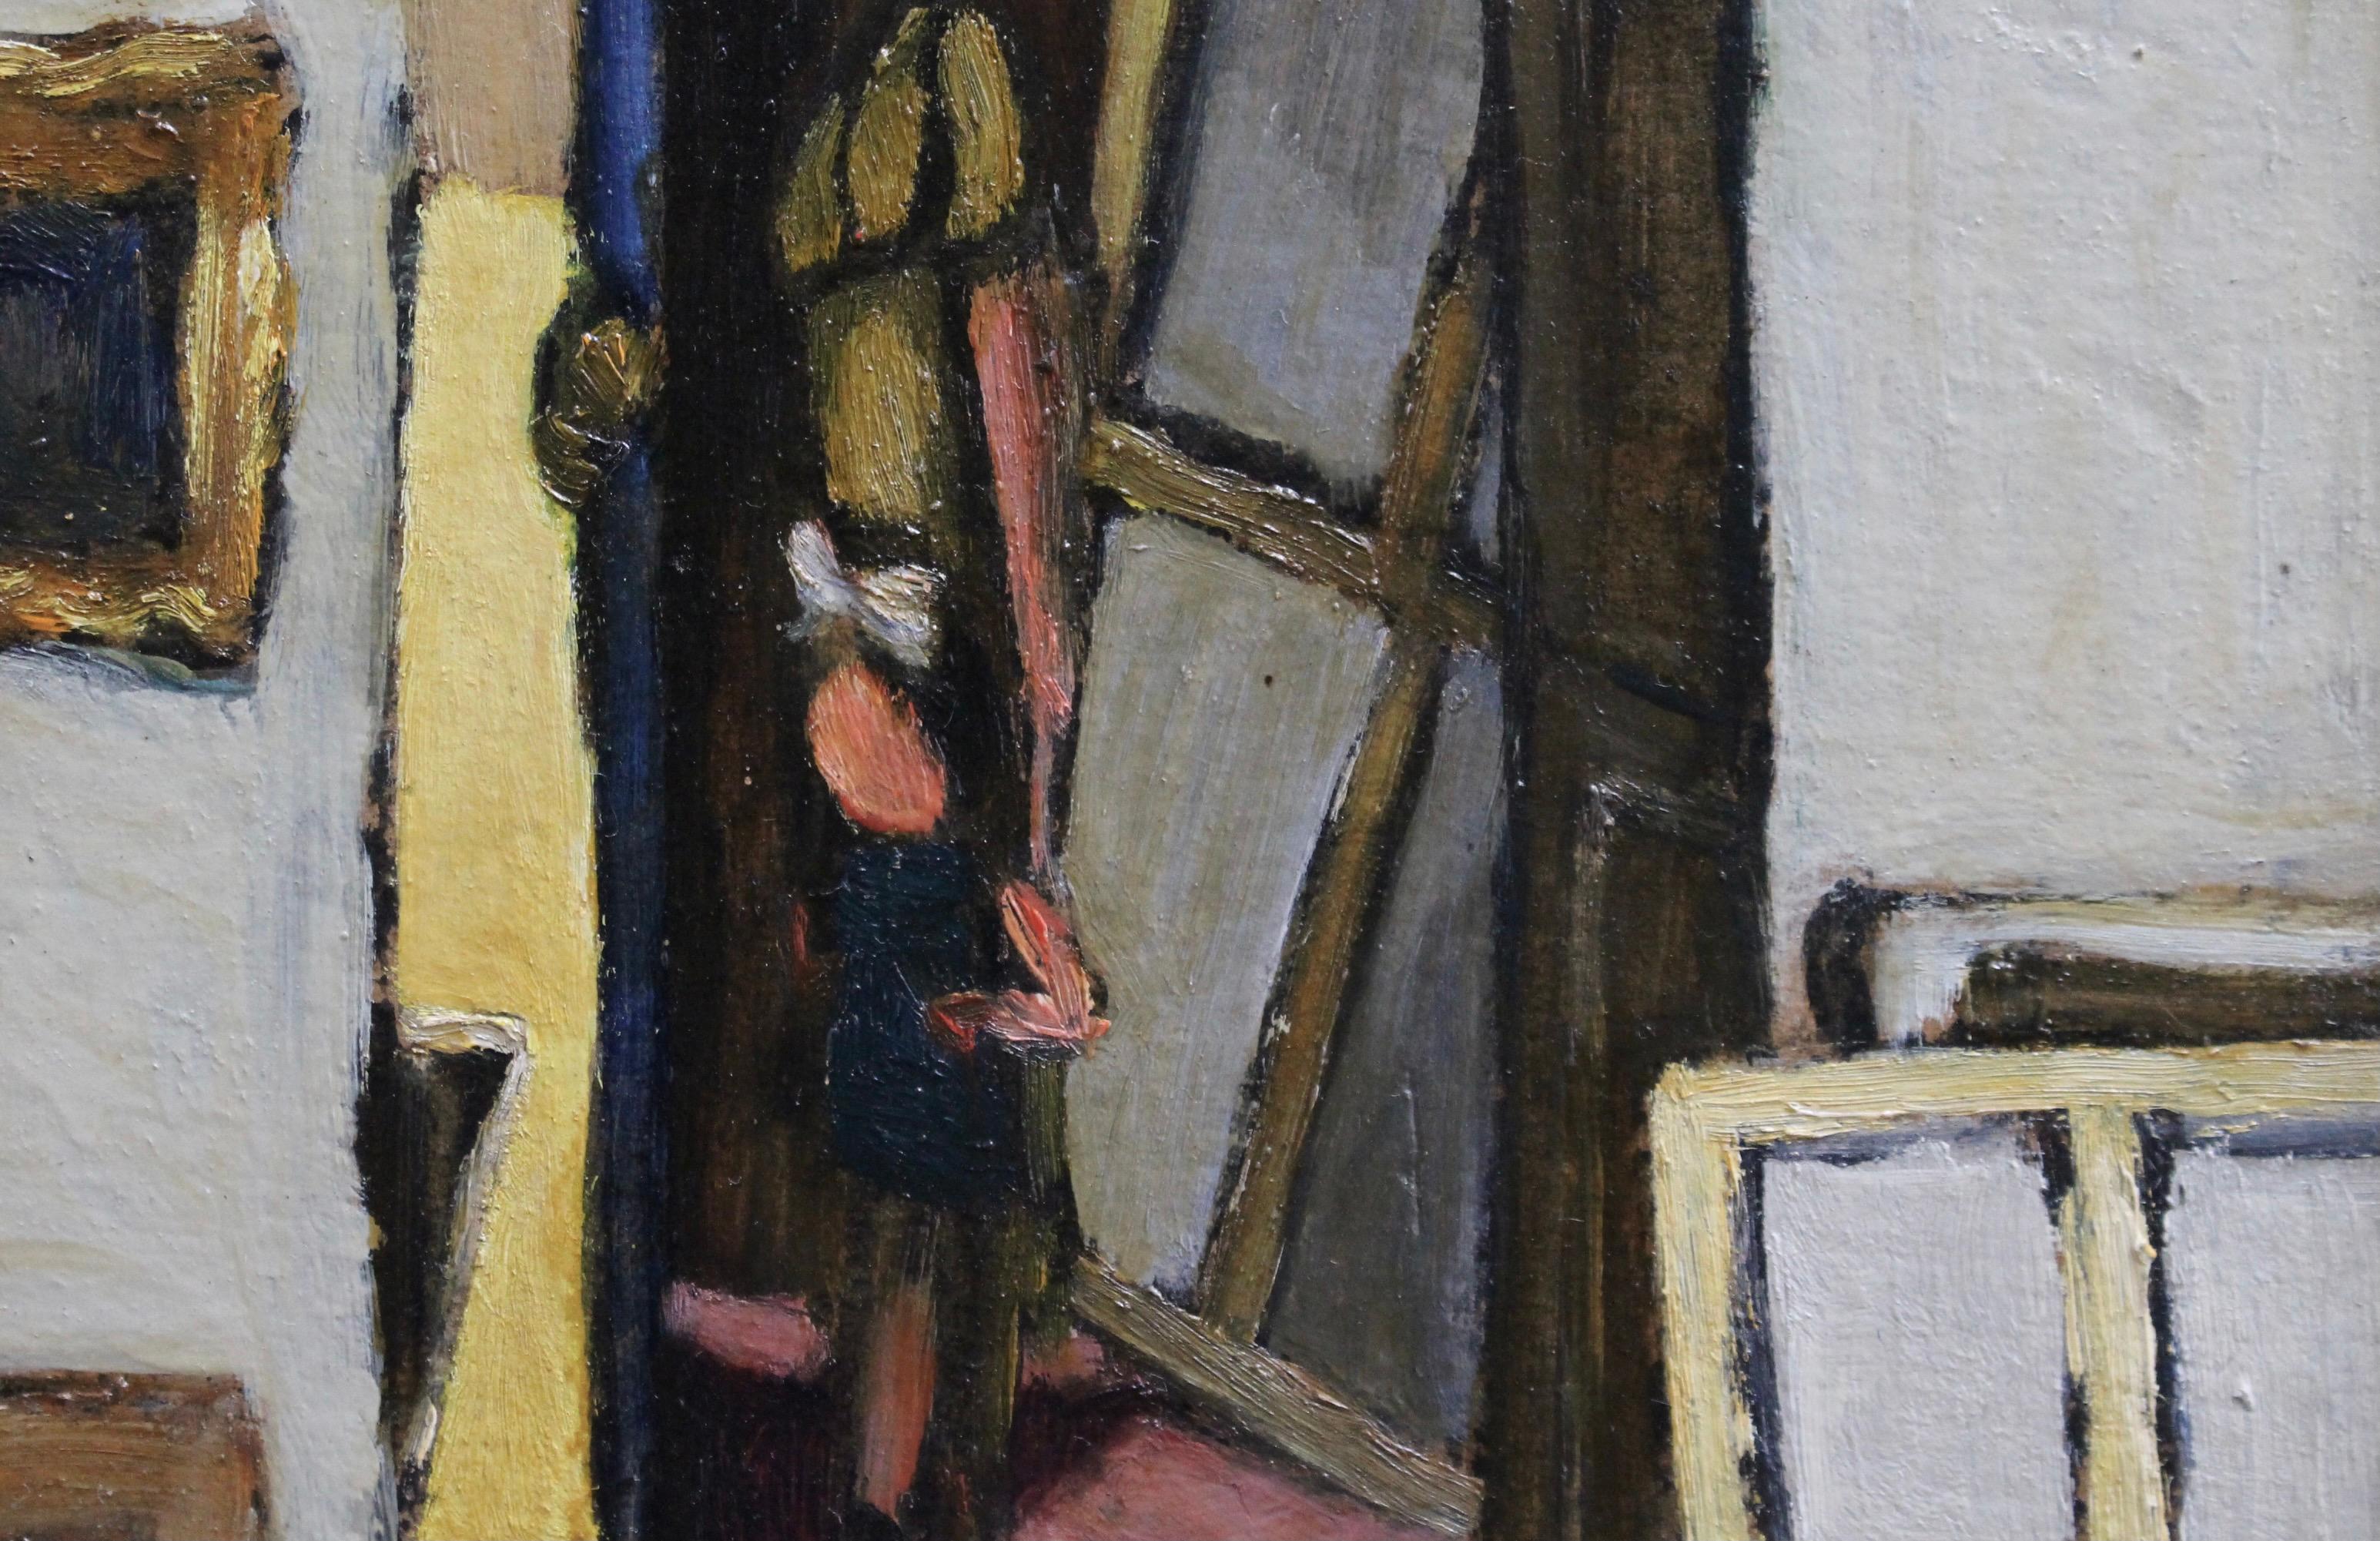 Woman and Child with Windows - Modern Painting by Paul Ackerman